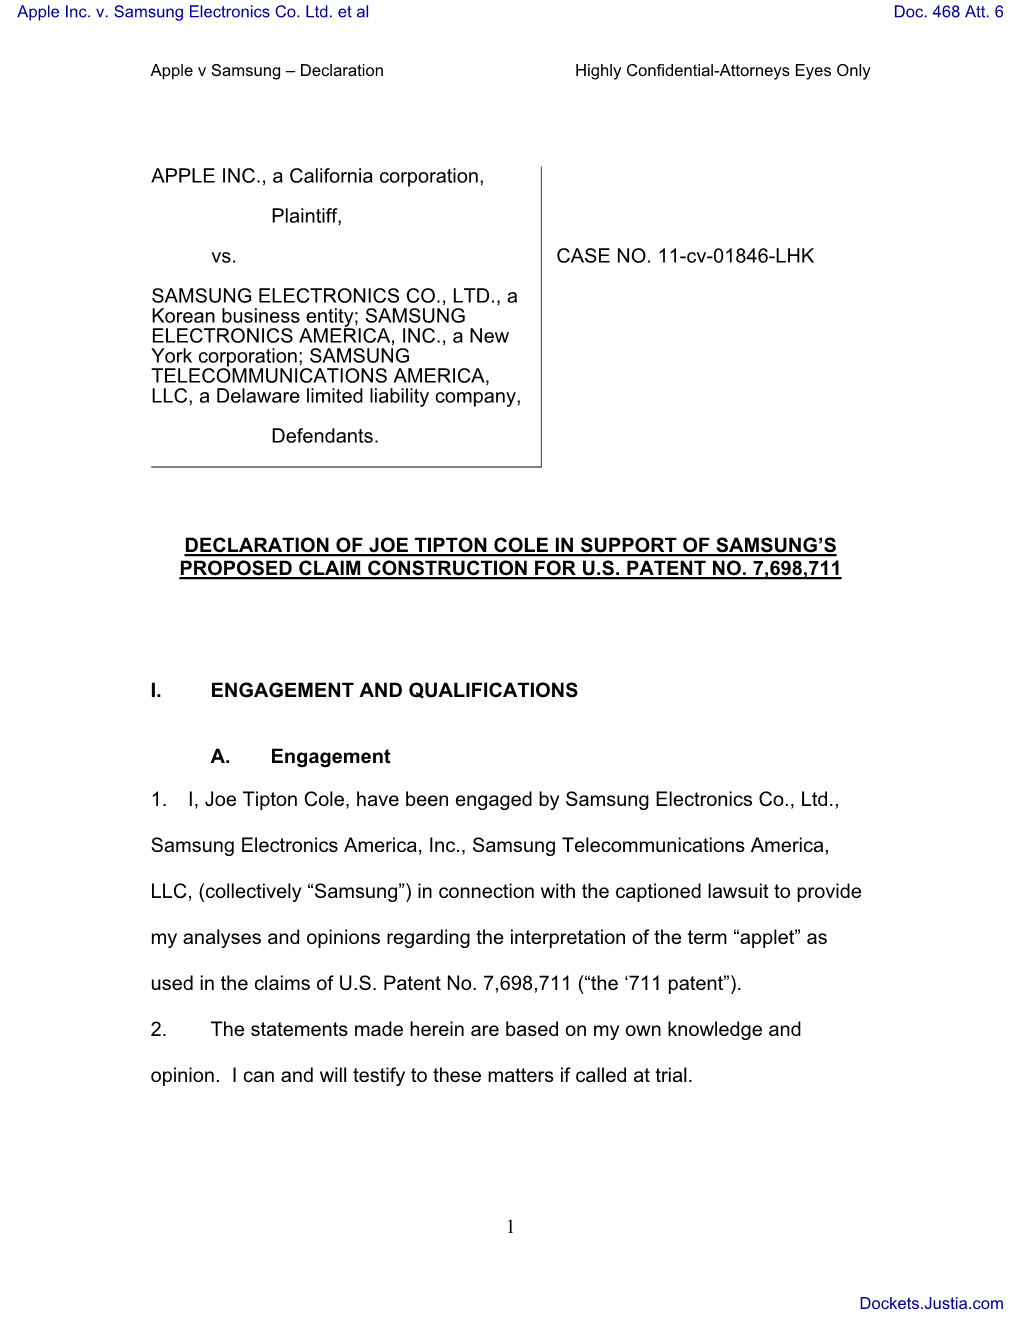 EXHIBITS Re 466 Declaration in Support, of SAMSUNG's ADMINISTRATIVE MOTION to FILE UNDER SEAL Filed Bysamsung Electronics Am